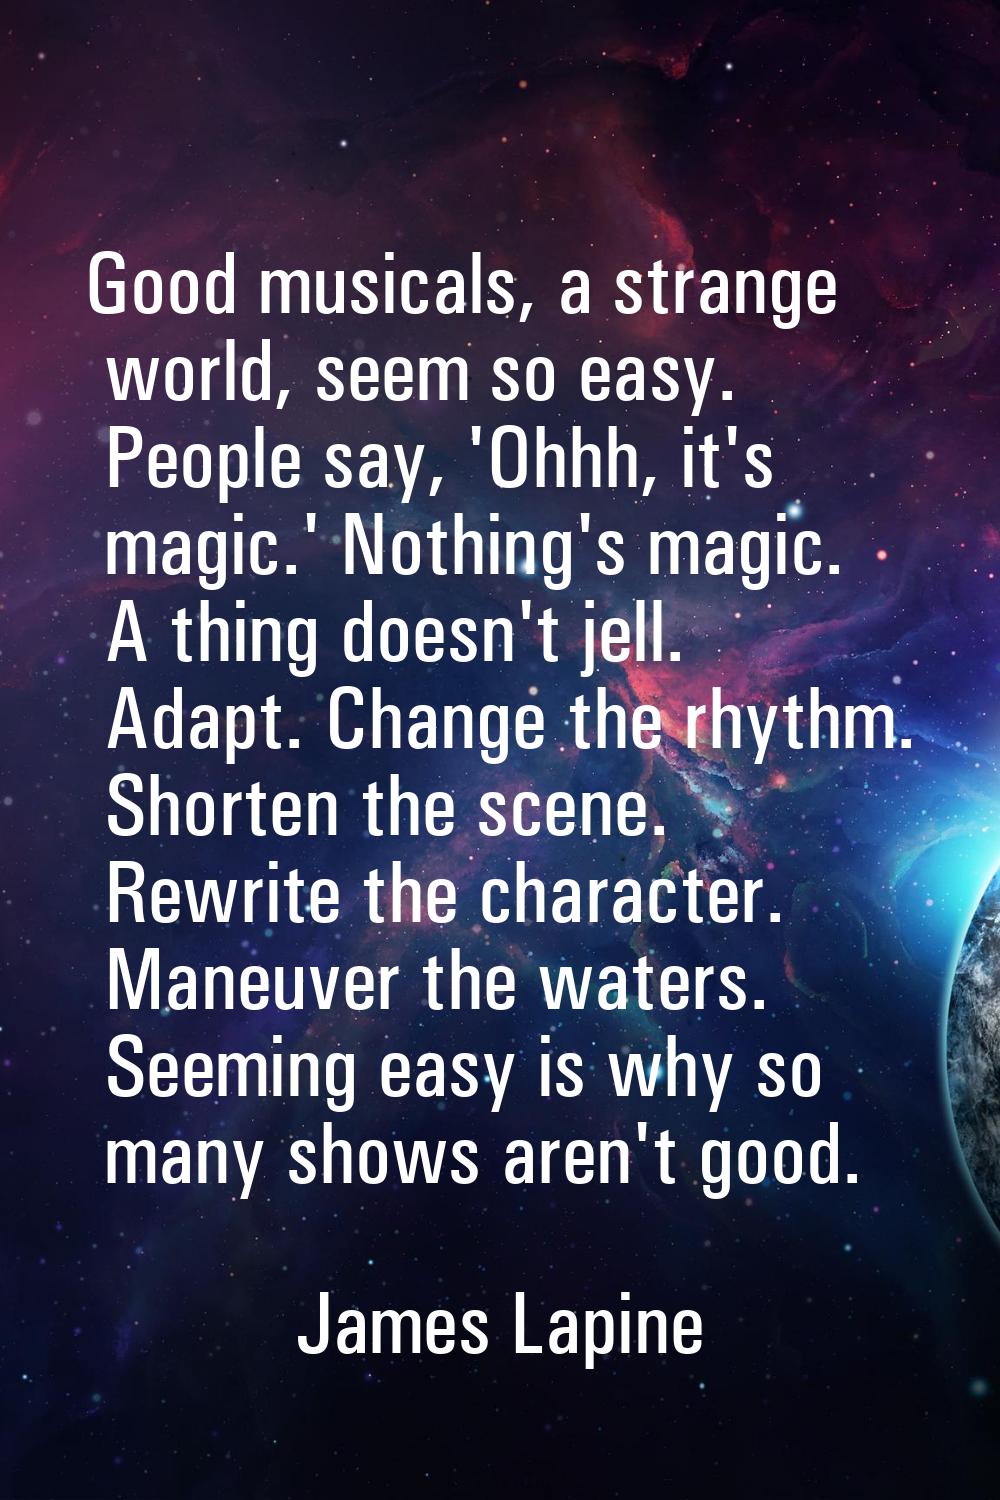 Good musicals, a strange world, seem so easy. People say, 'Ohhh, it's magic.' Nothing's magic. A th